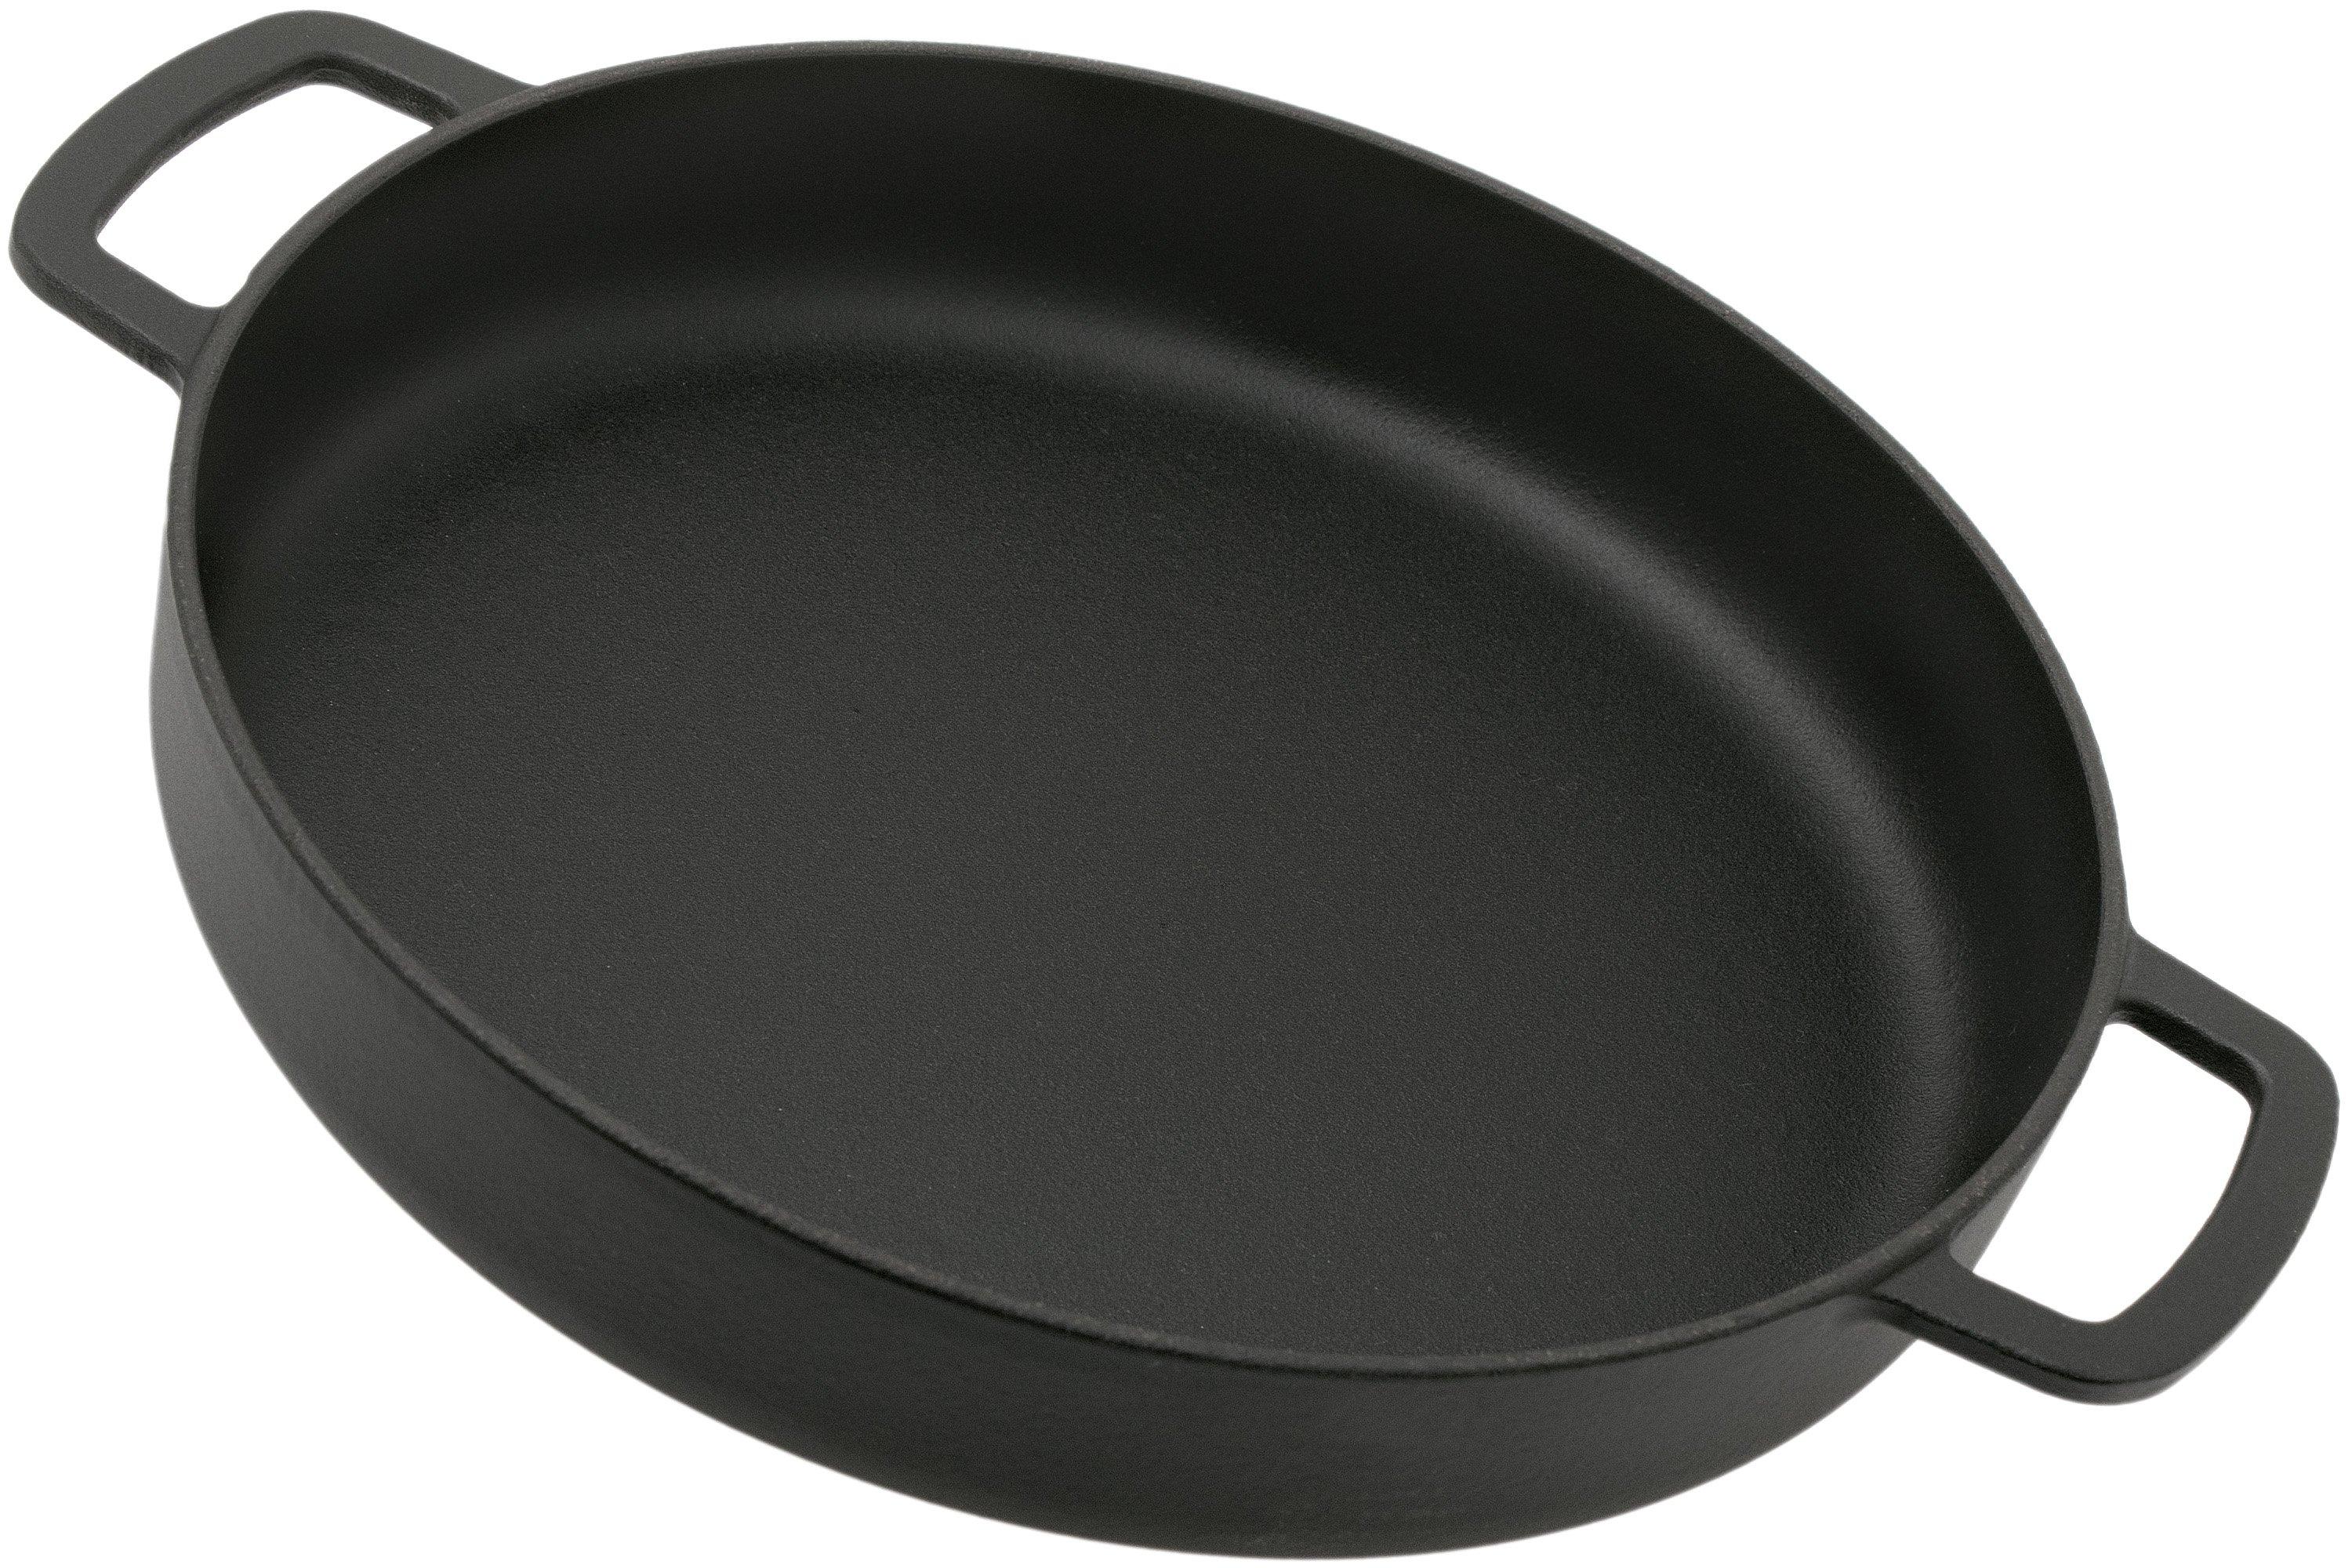 Lodge skillet/frying pan with two handles L17SK3, diameter approx